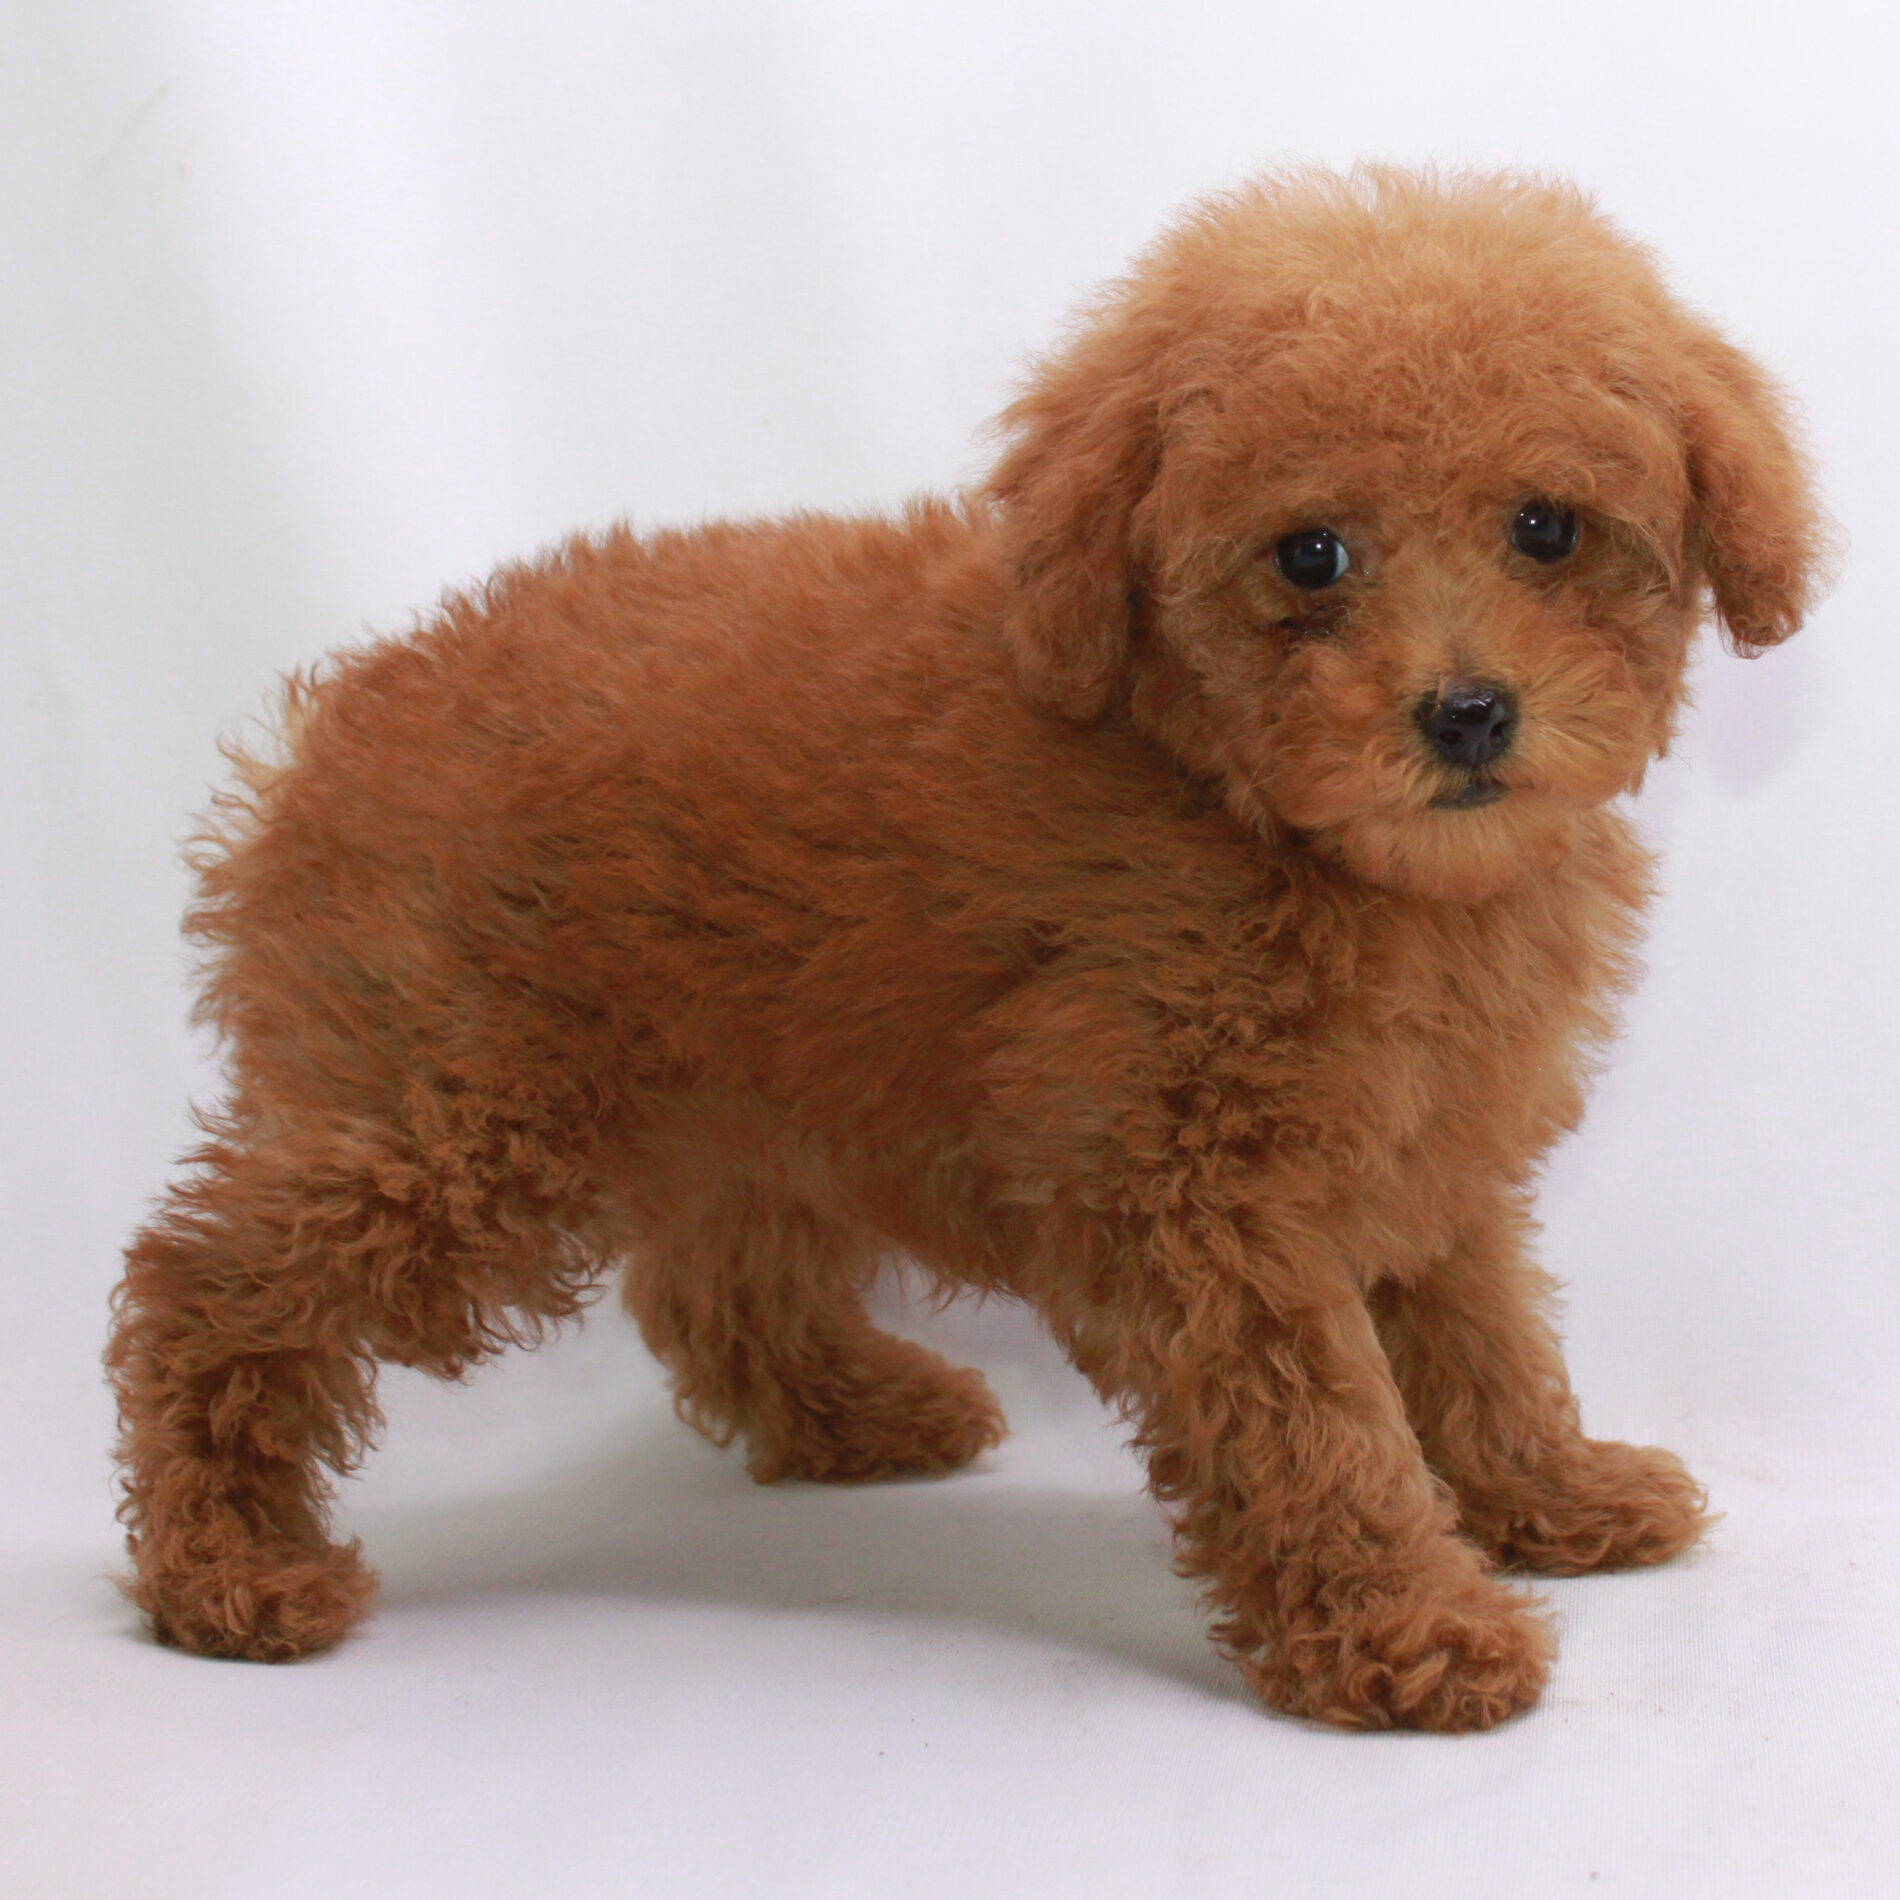 how much is a red toy poodle? 2